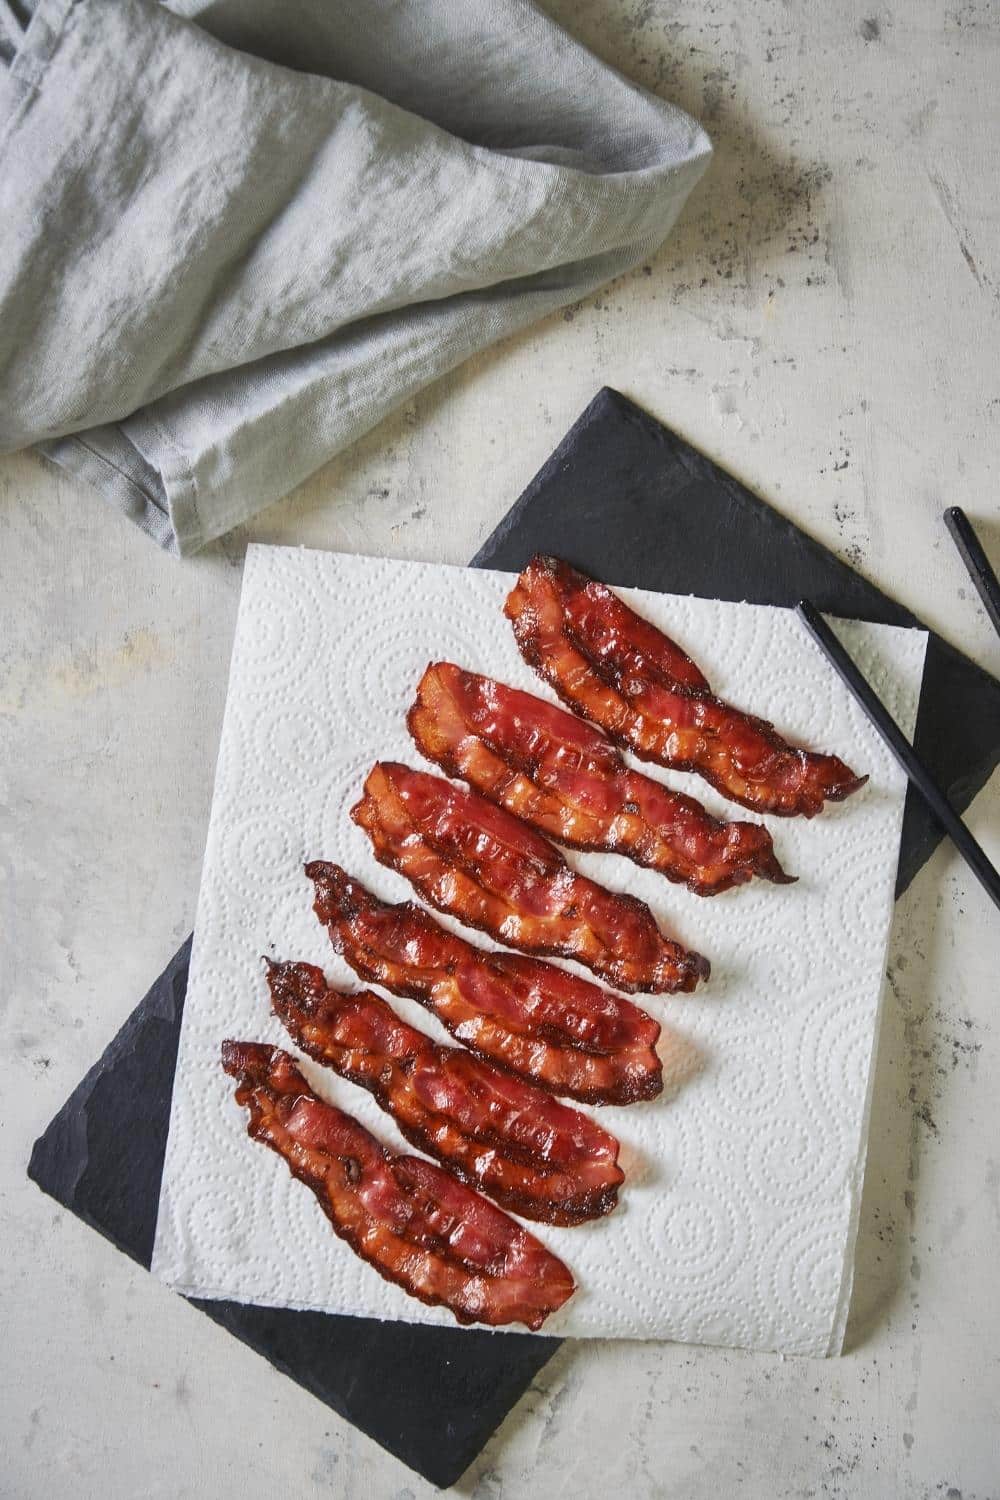 Six pieces of cooked turkey bacon on a paper towel on top of a slate serving platter. A pair of black tong rests on the edge of the platter and a tea towel is folded on the upper left corner.